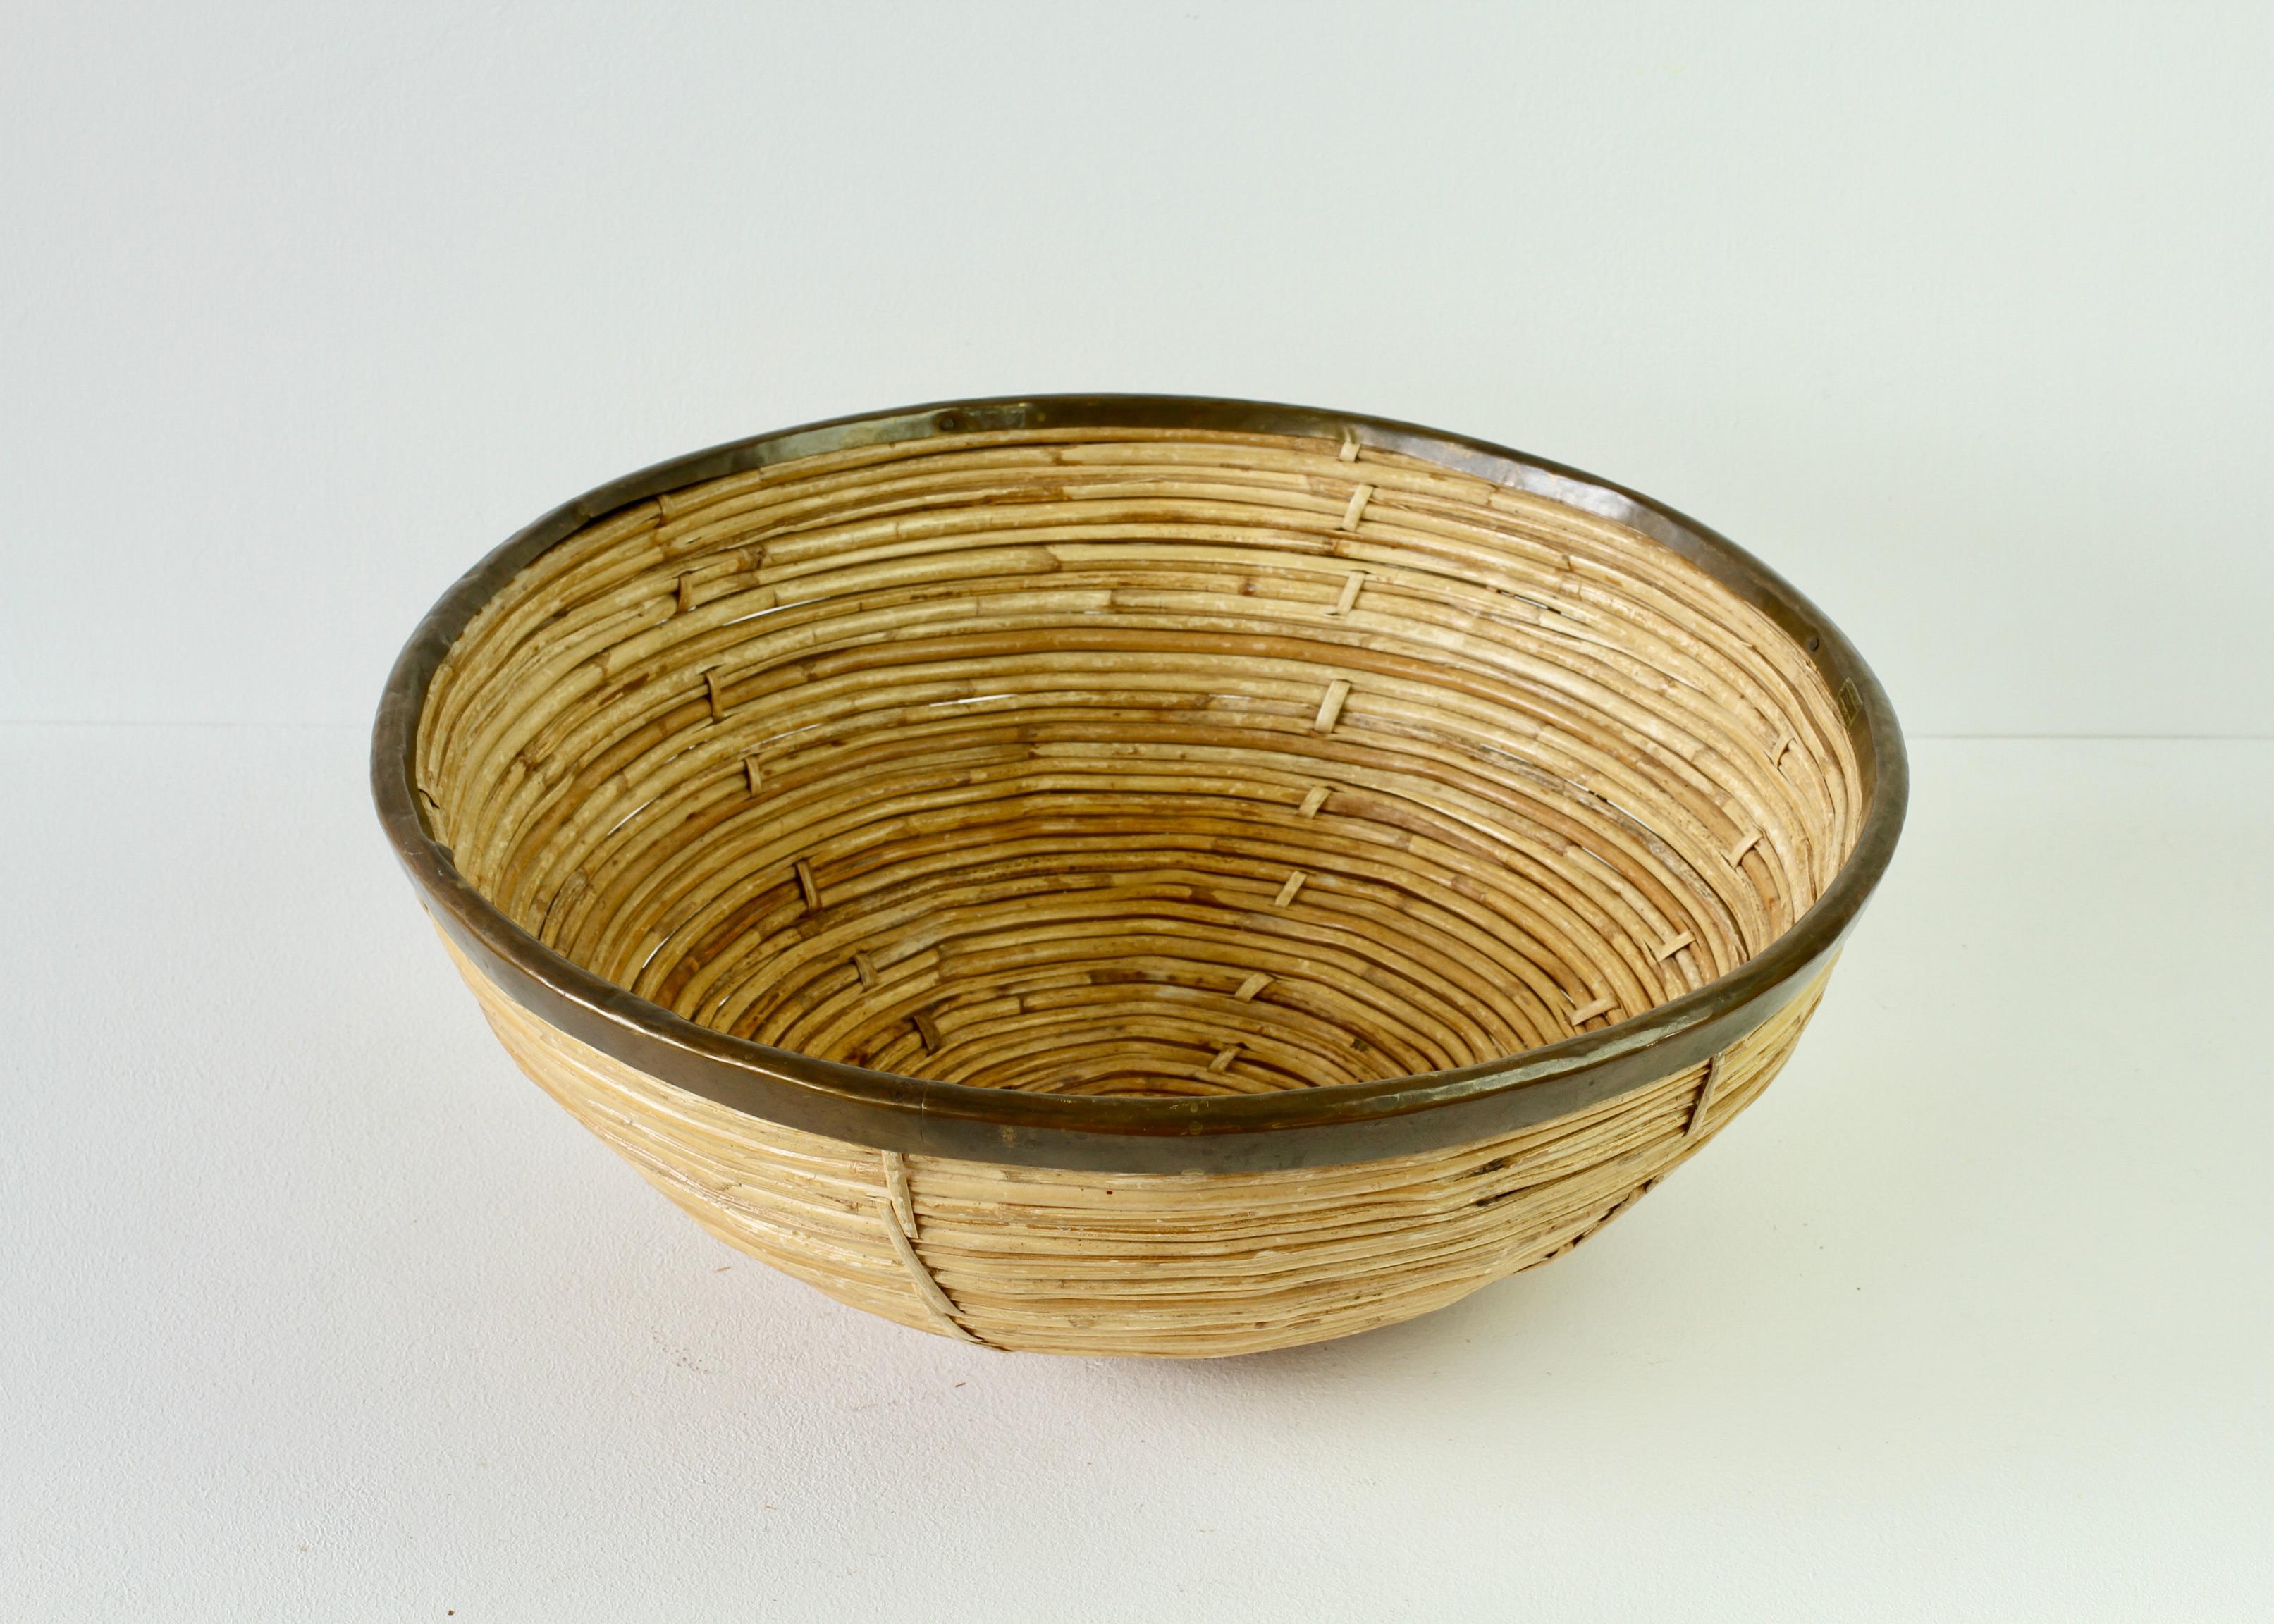 Large circular Mid-Century Hollywood Regency Gabriella Crespi style round bowl or dish made in Italy, circa 1970s. Made of weaved / woven rattan / wicker and bamboo with a patinated brass rim detail which finishes the piece perfectly. A must have